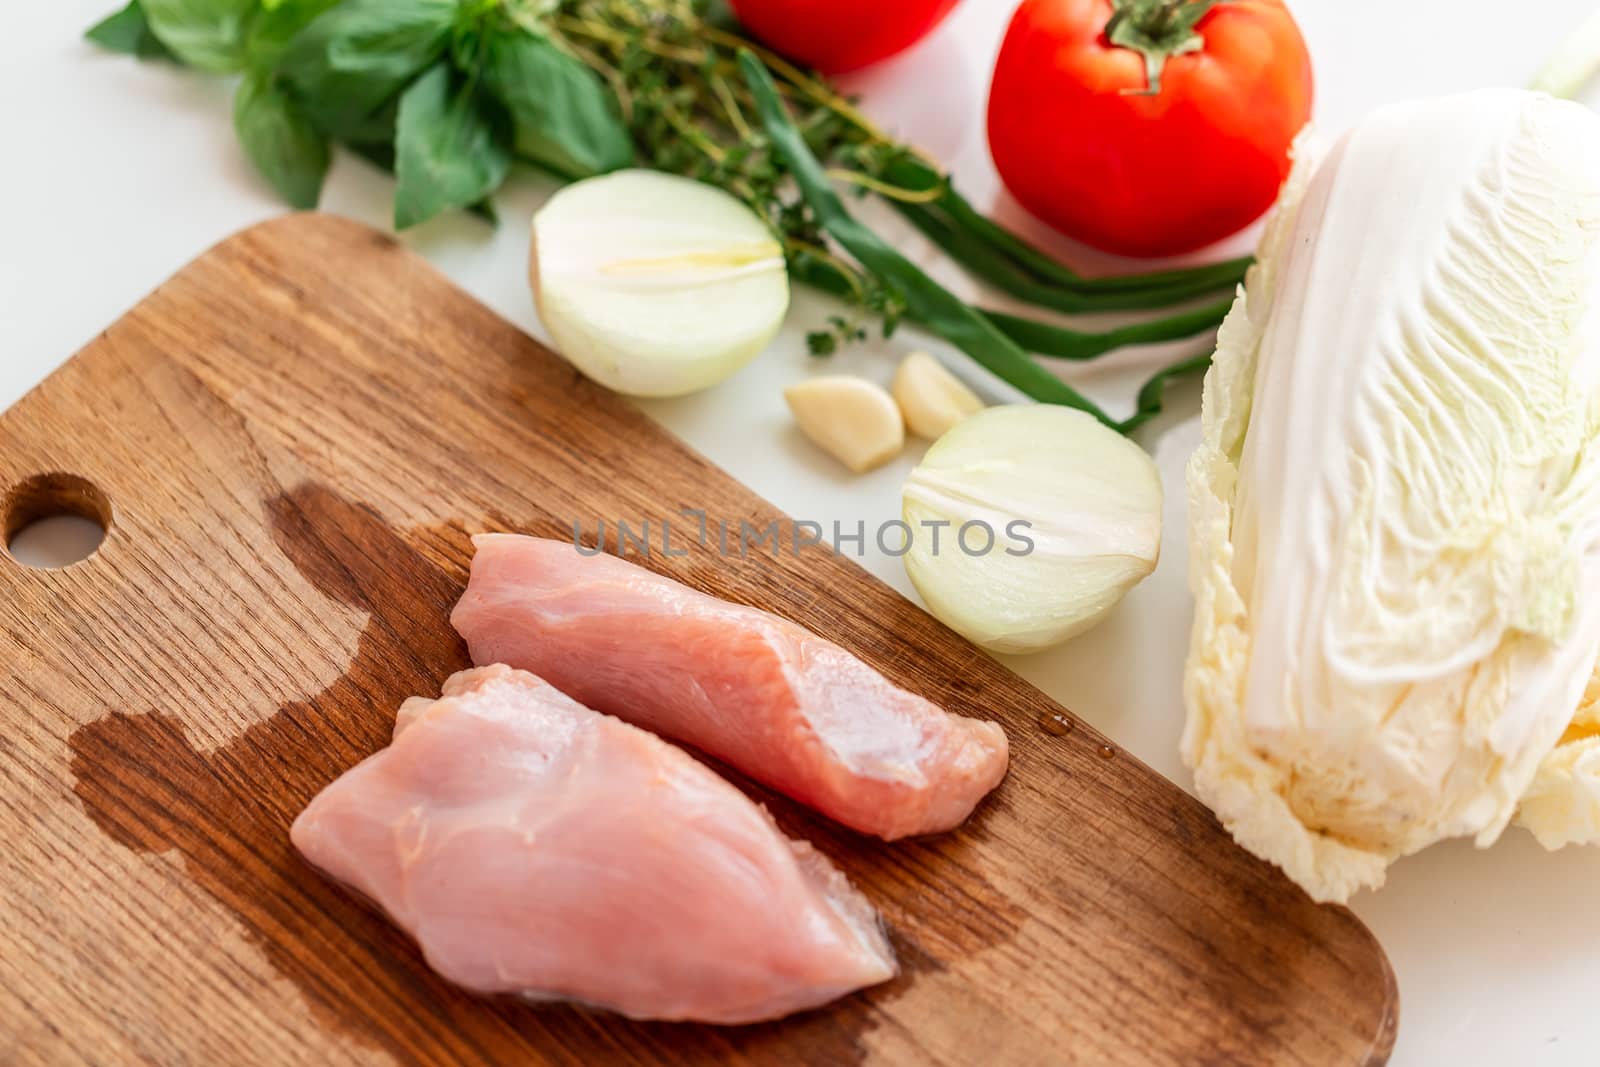 Cooking chicken tenders at home. Chicken fillet on the wooden board prepared to be cut